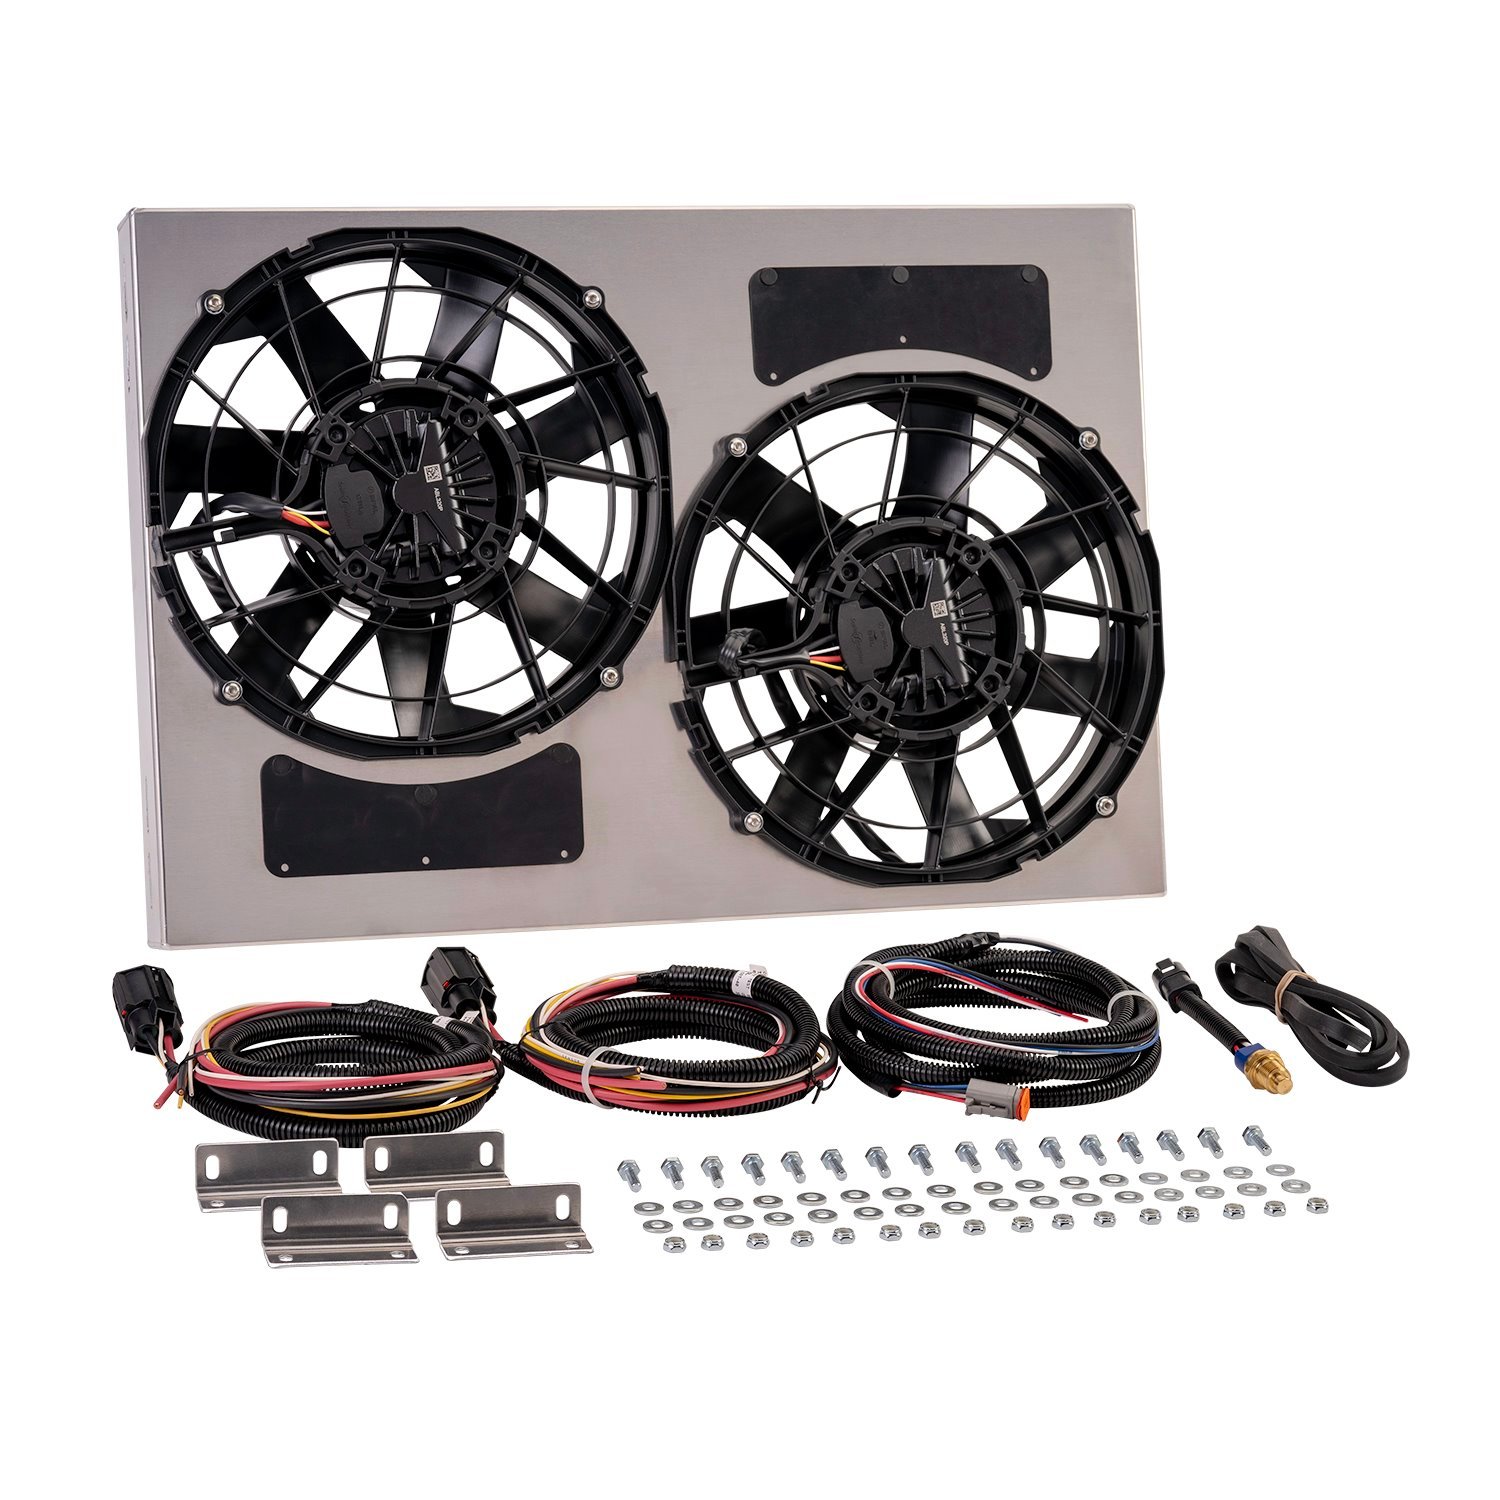 67938-195 Brushless Dual Powerpack 12 in. Radiator Fan Assembly with Integrated 195 Degree PWM Controller